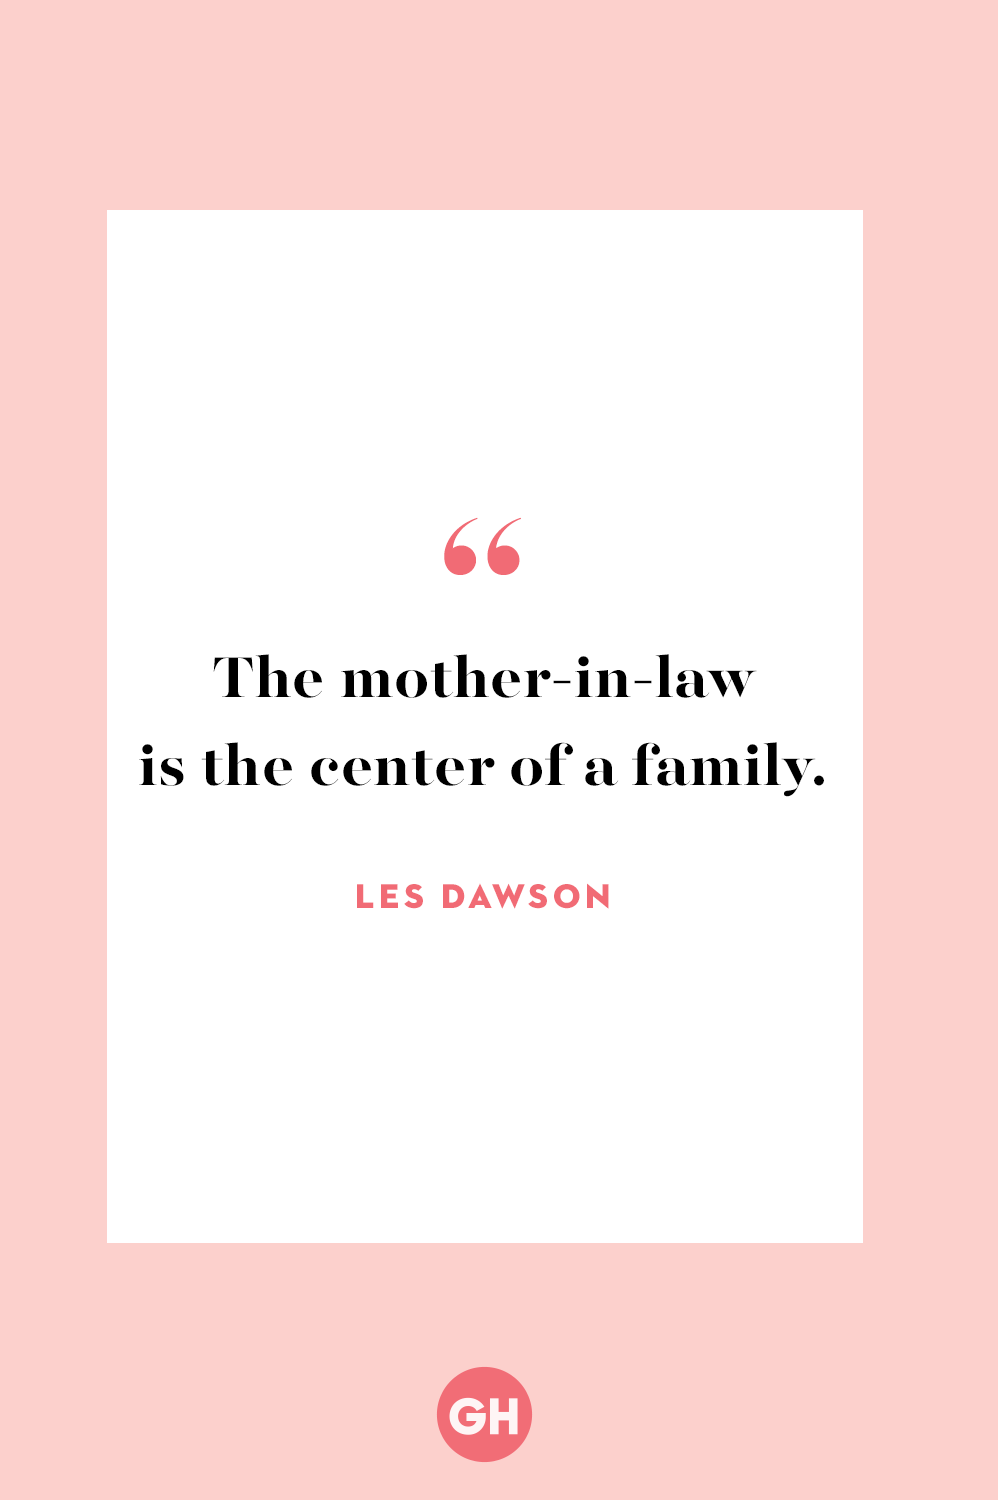 20 Best Mother-in-Law Quotes - Sayings and Quotes for Mother-in-Law